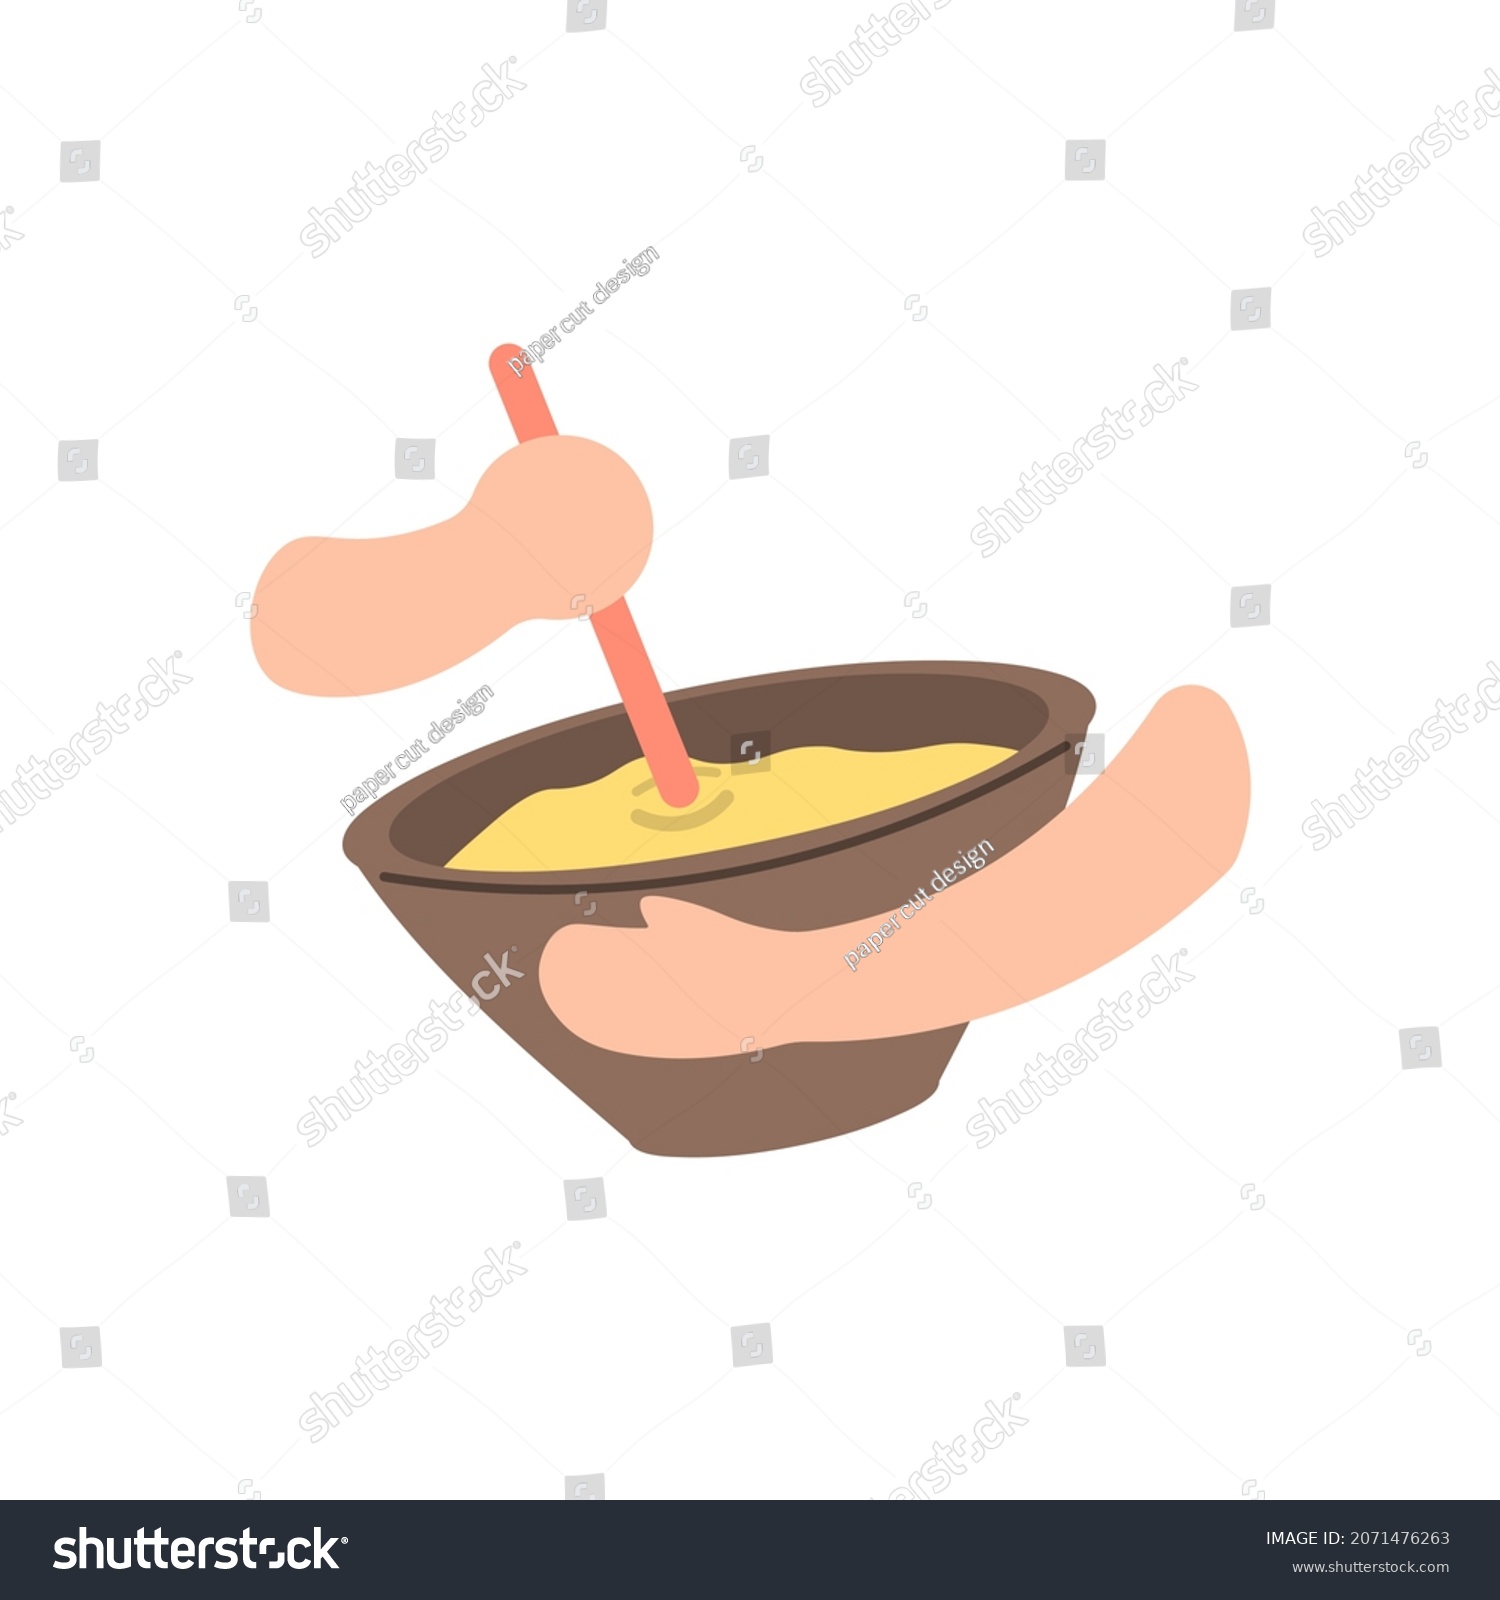 SVG of illustration of people's hands mixing bread dough in a bowl using the manual method. making cake. flat cartoon style. vector design. can be used for elements, landing pages, UI. svg